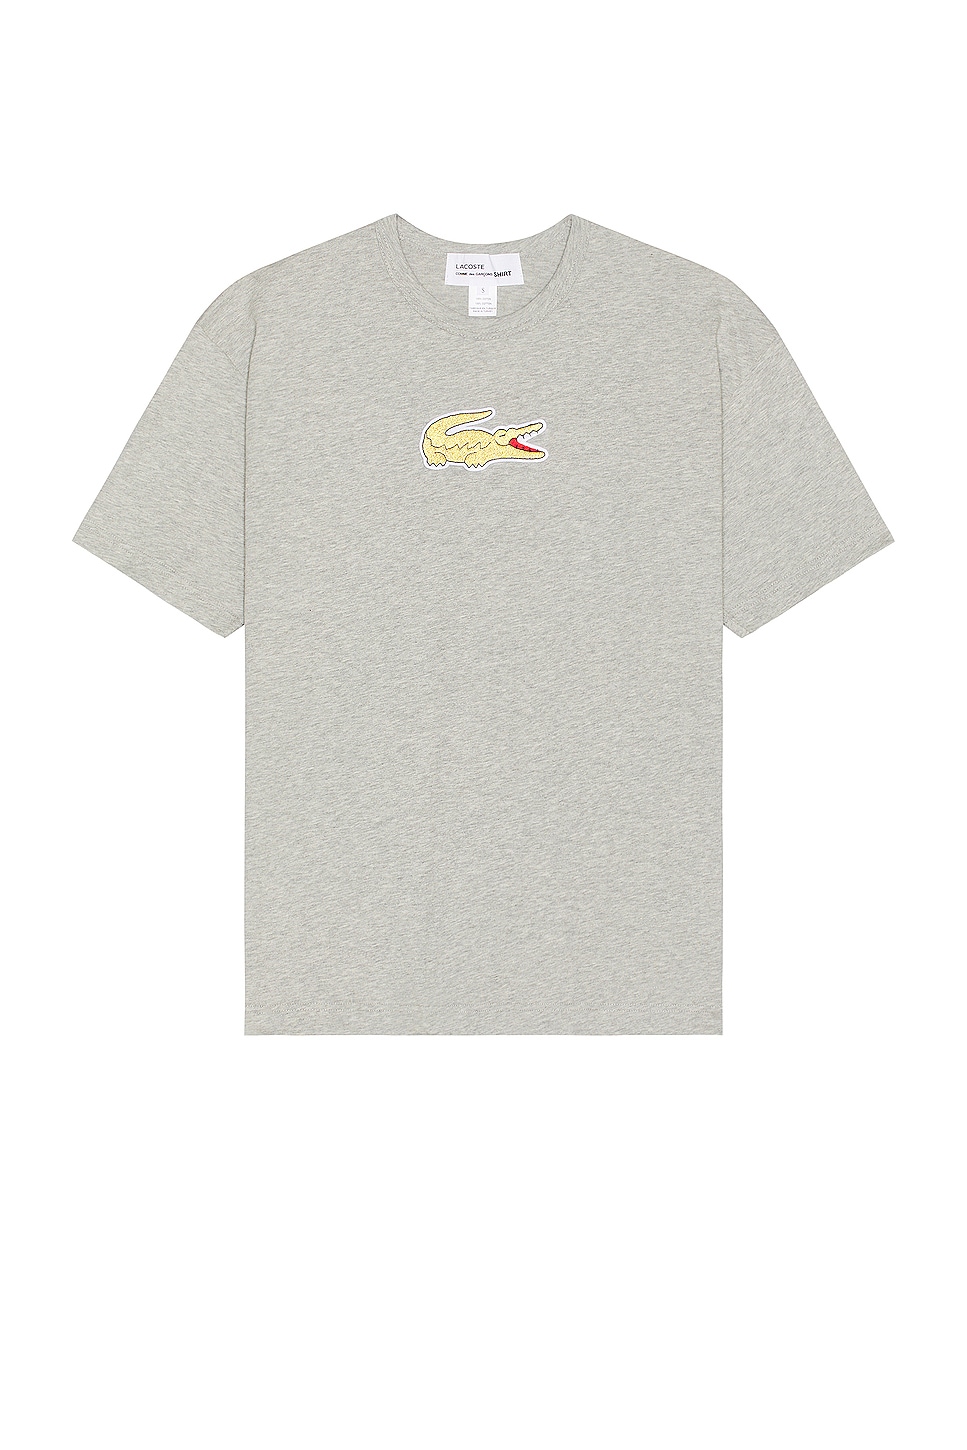 Image 1 of COMME des GARCONS SHIRT X Lacoste Tee in Grey